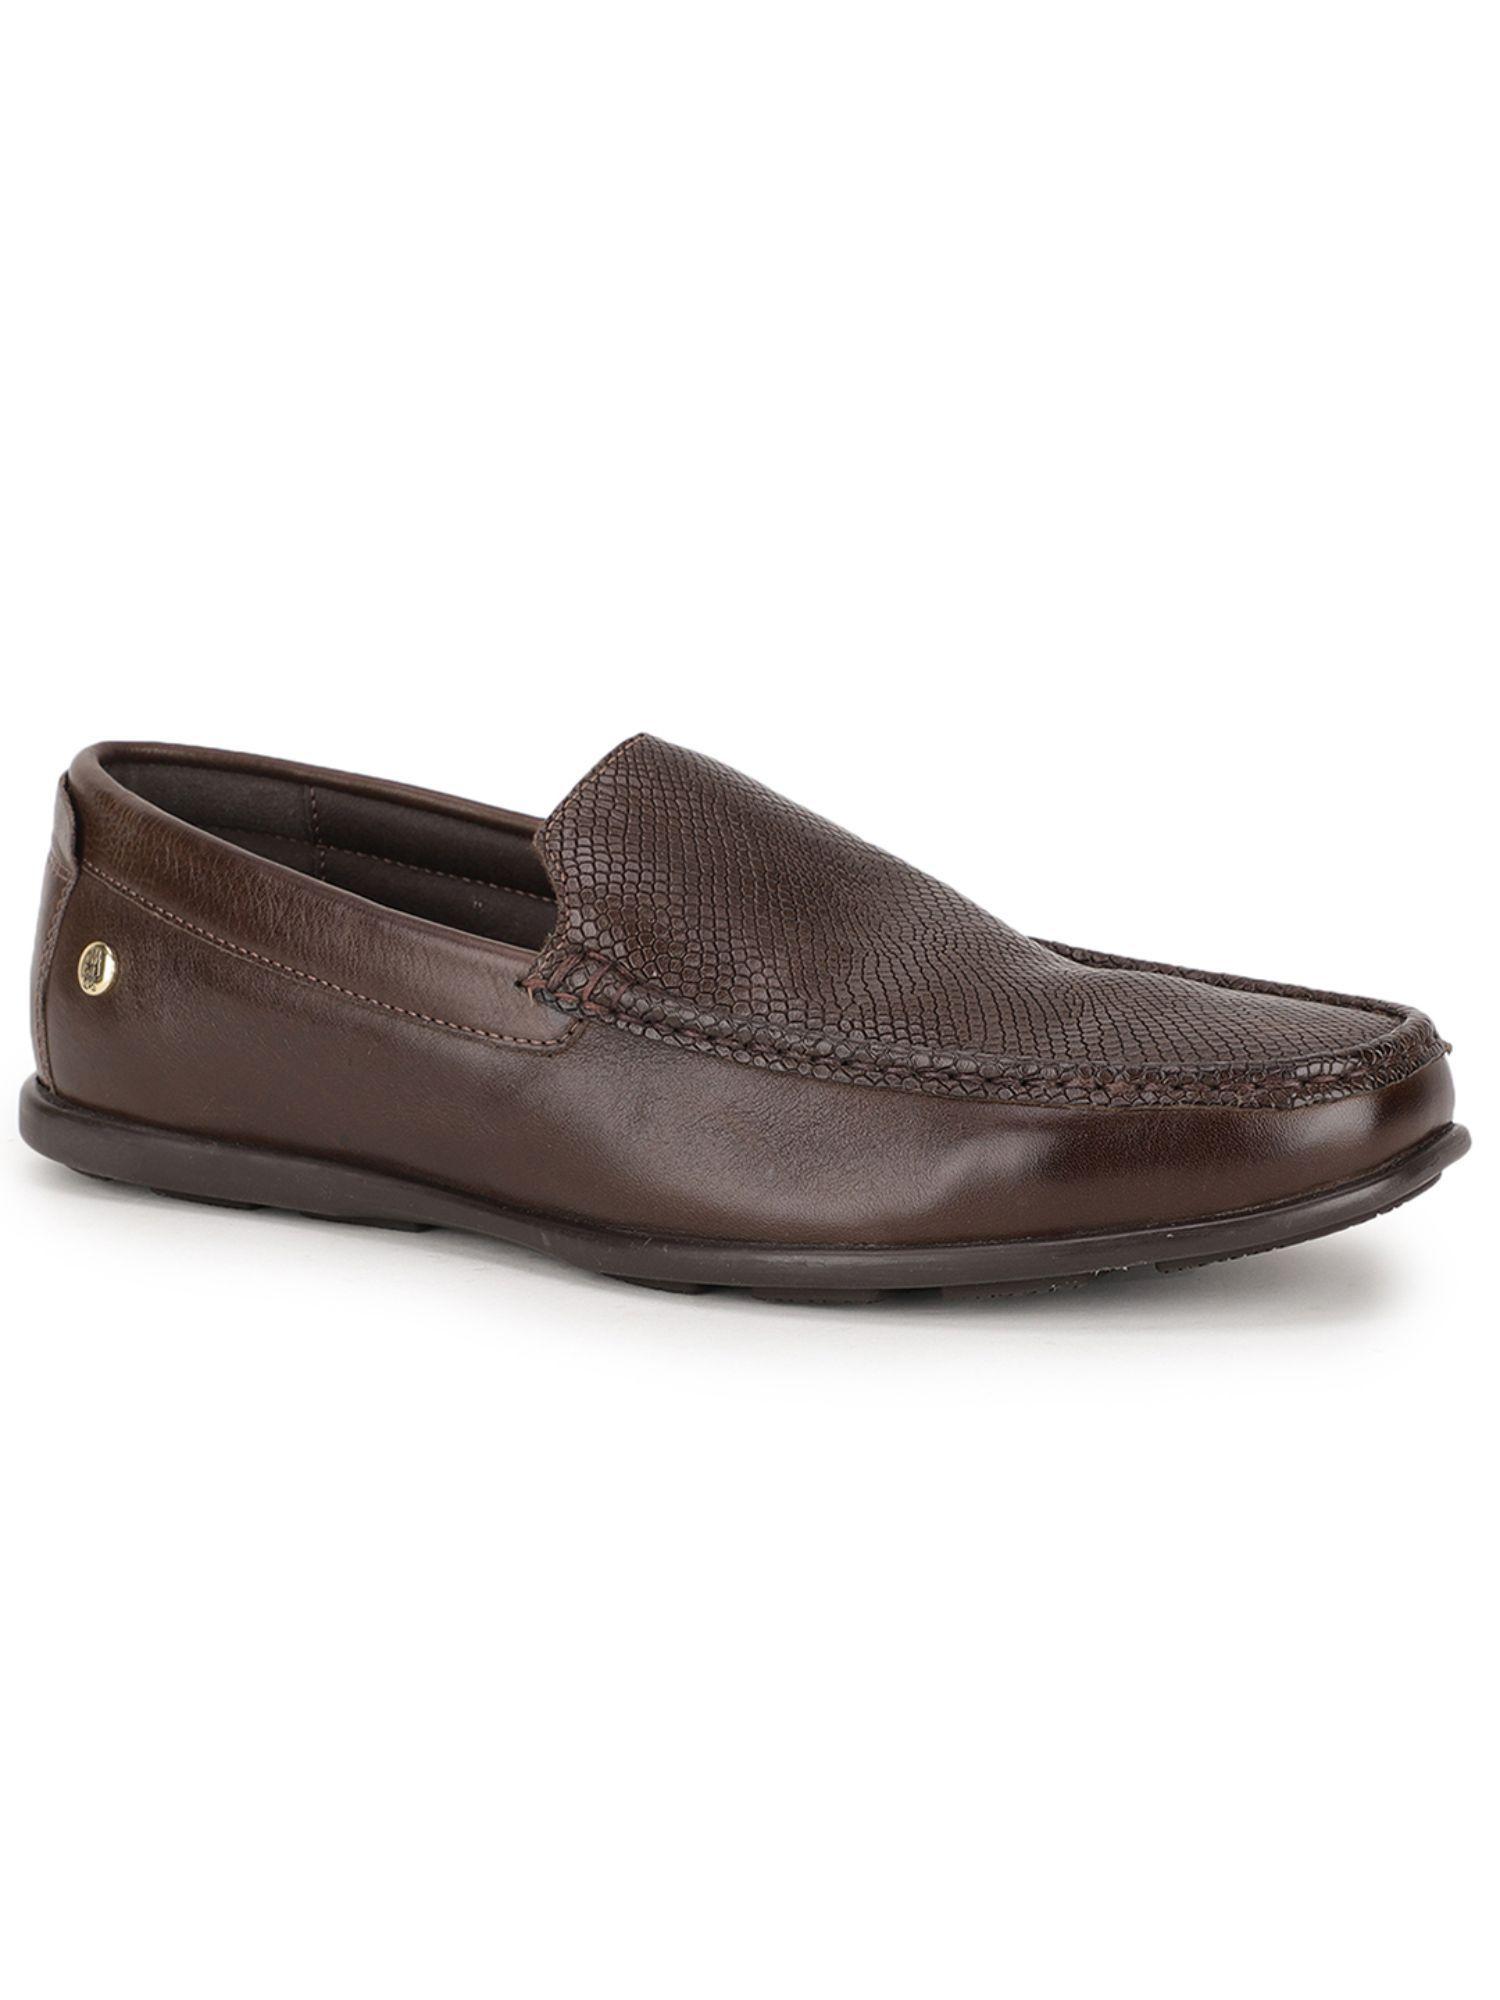 mens brown slip on casual loafers